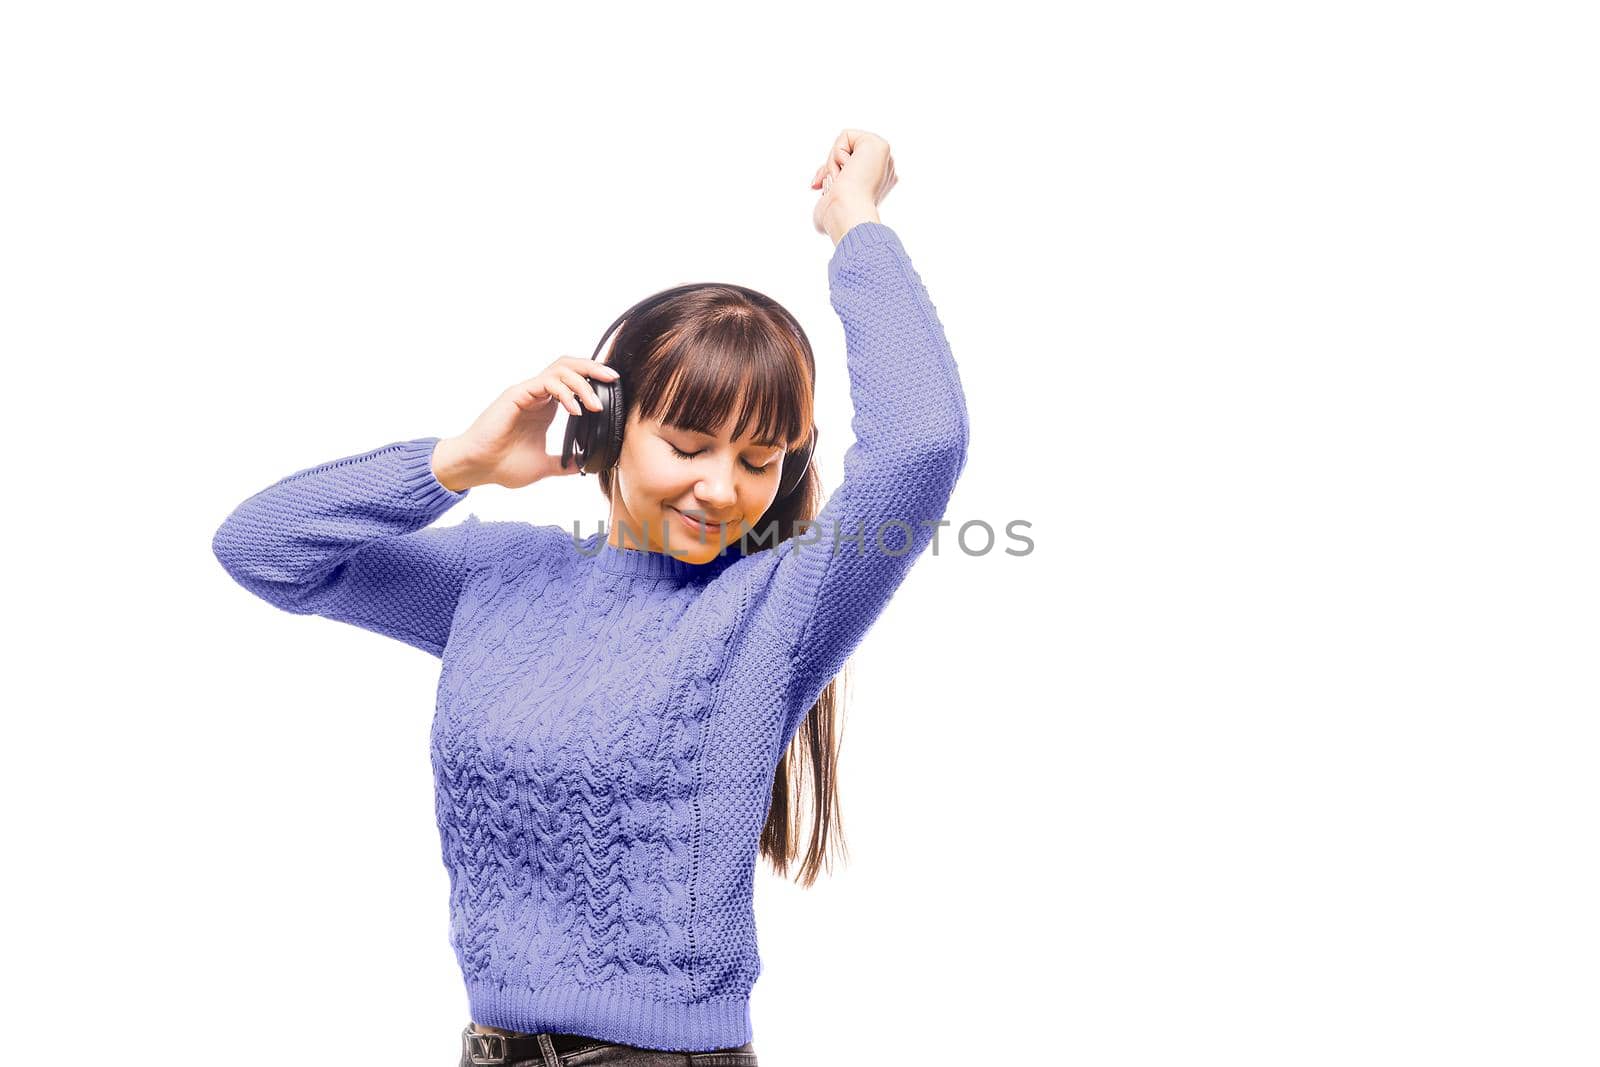 A brunette woman in a violet sweater is listening to music with headphones. Demonstrating the colors of 2022 - Very Peri.